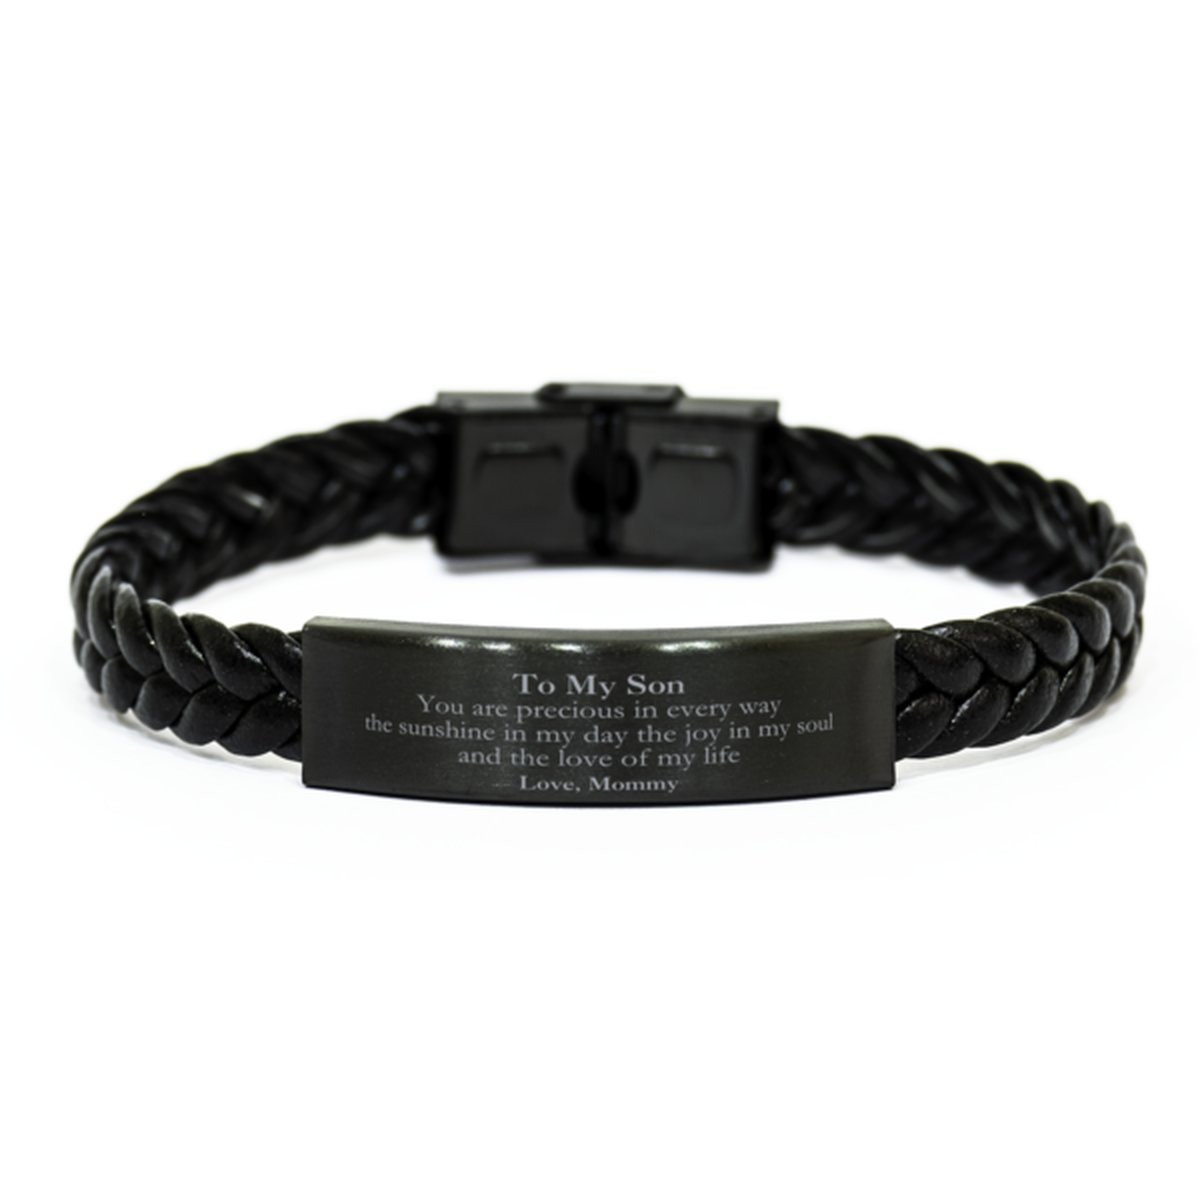 Graduation Gifts for Son Braided Leather Bracelet Present from Mommy, Christmas Son Birthday Gifts Son You are precious in every way the sunshine in my day. Love, Mommy